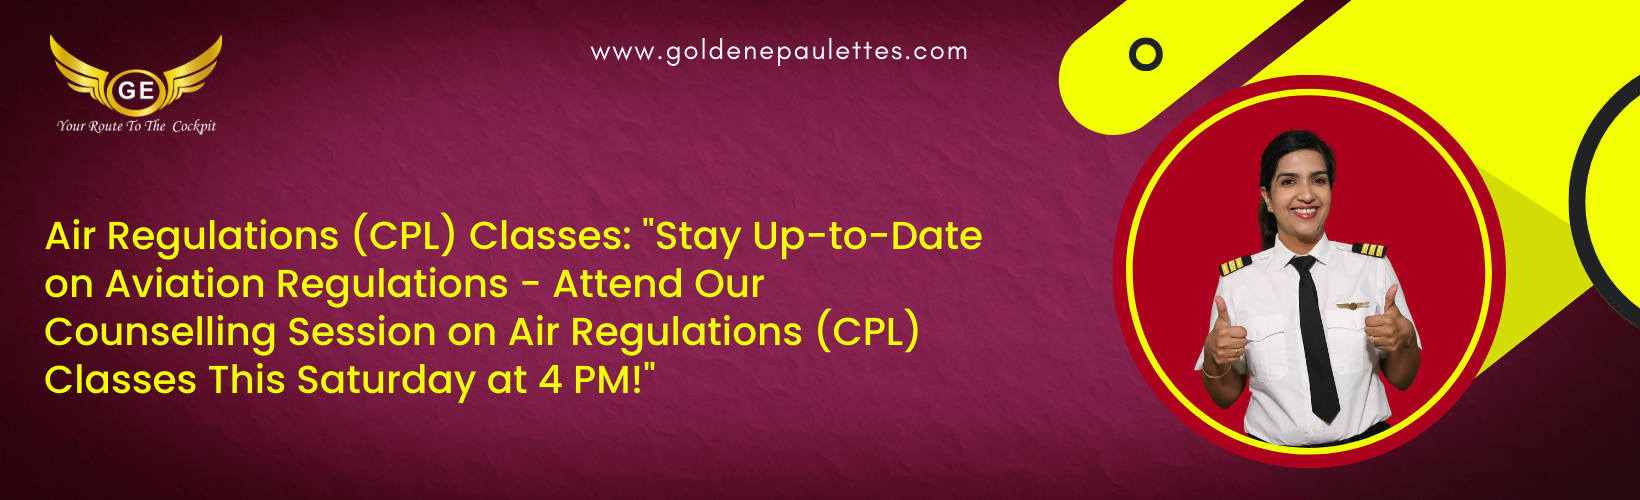 Join Golden Epaulettes Aviation for Expert Career Guidance and Obtain Your Commercial Pilot License from DGCA